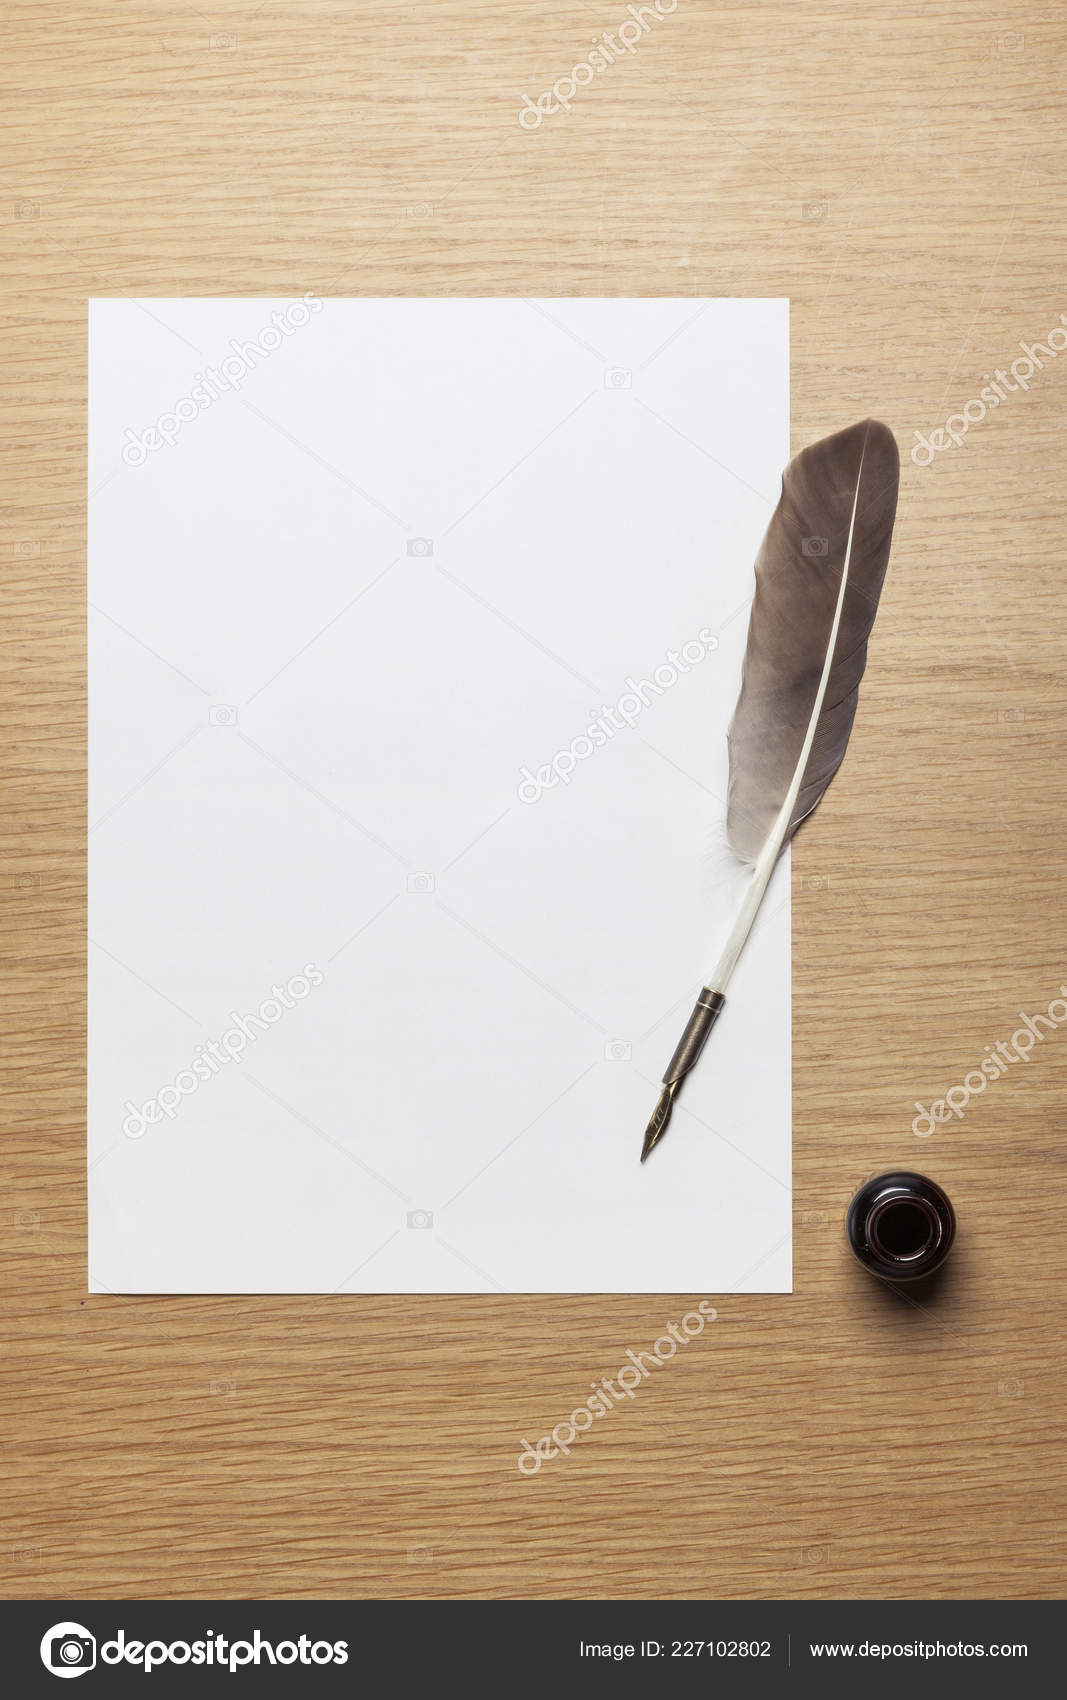 Feather / Quill Pen Letter Writing Paper and Envelopes